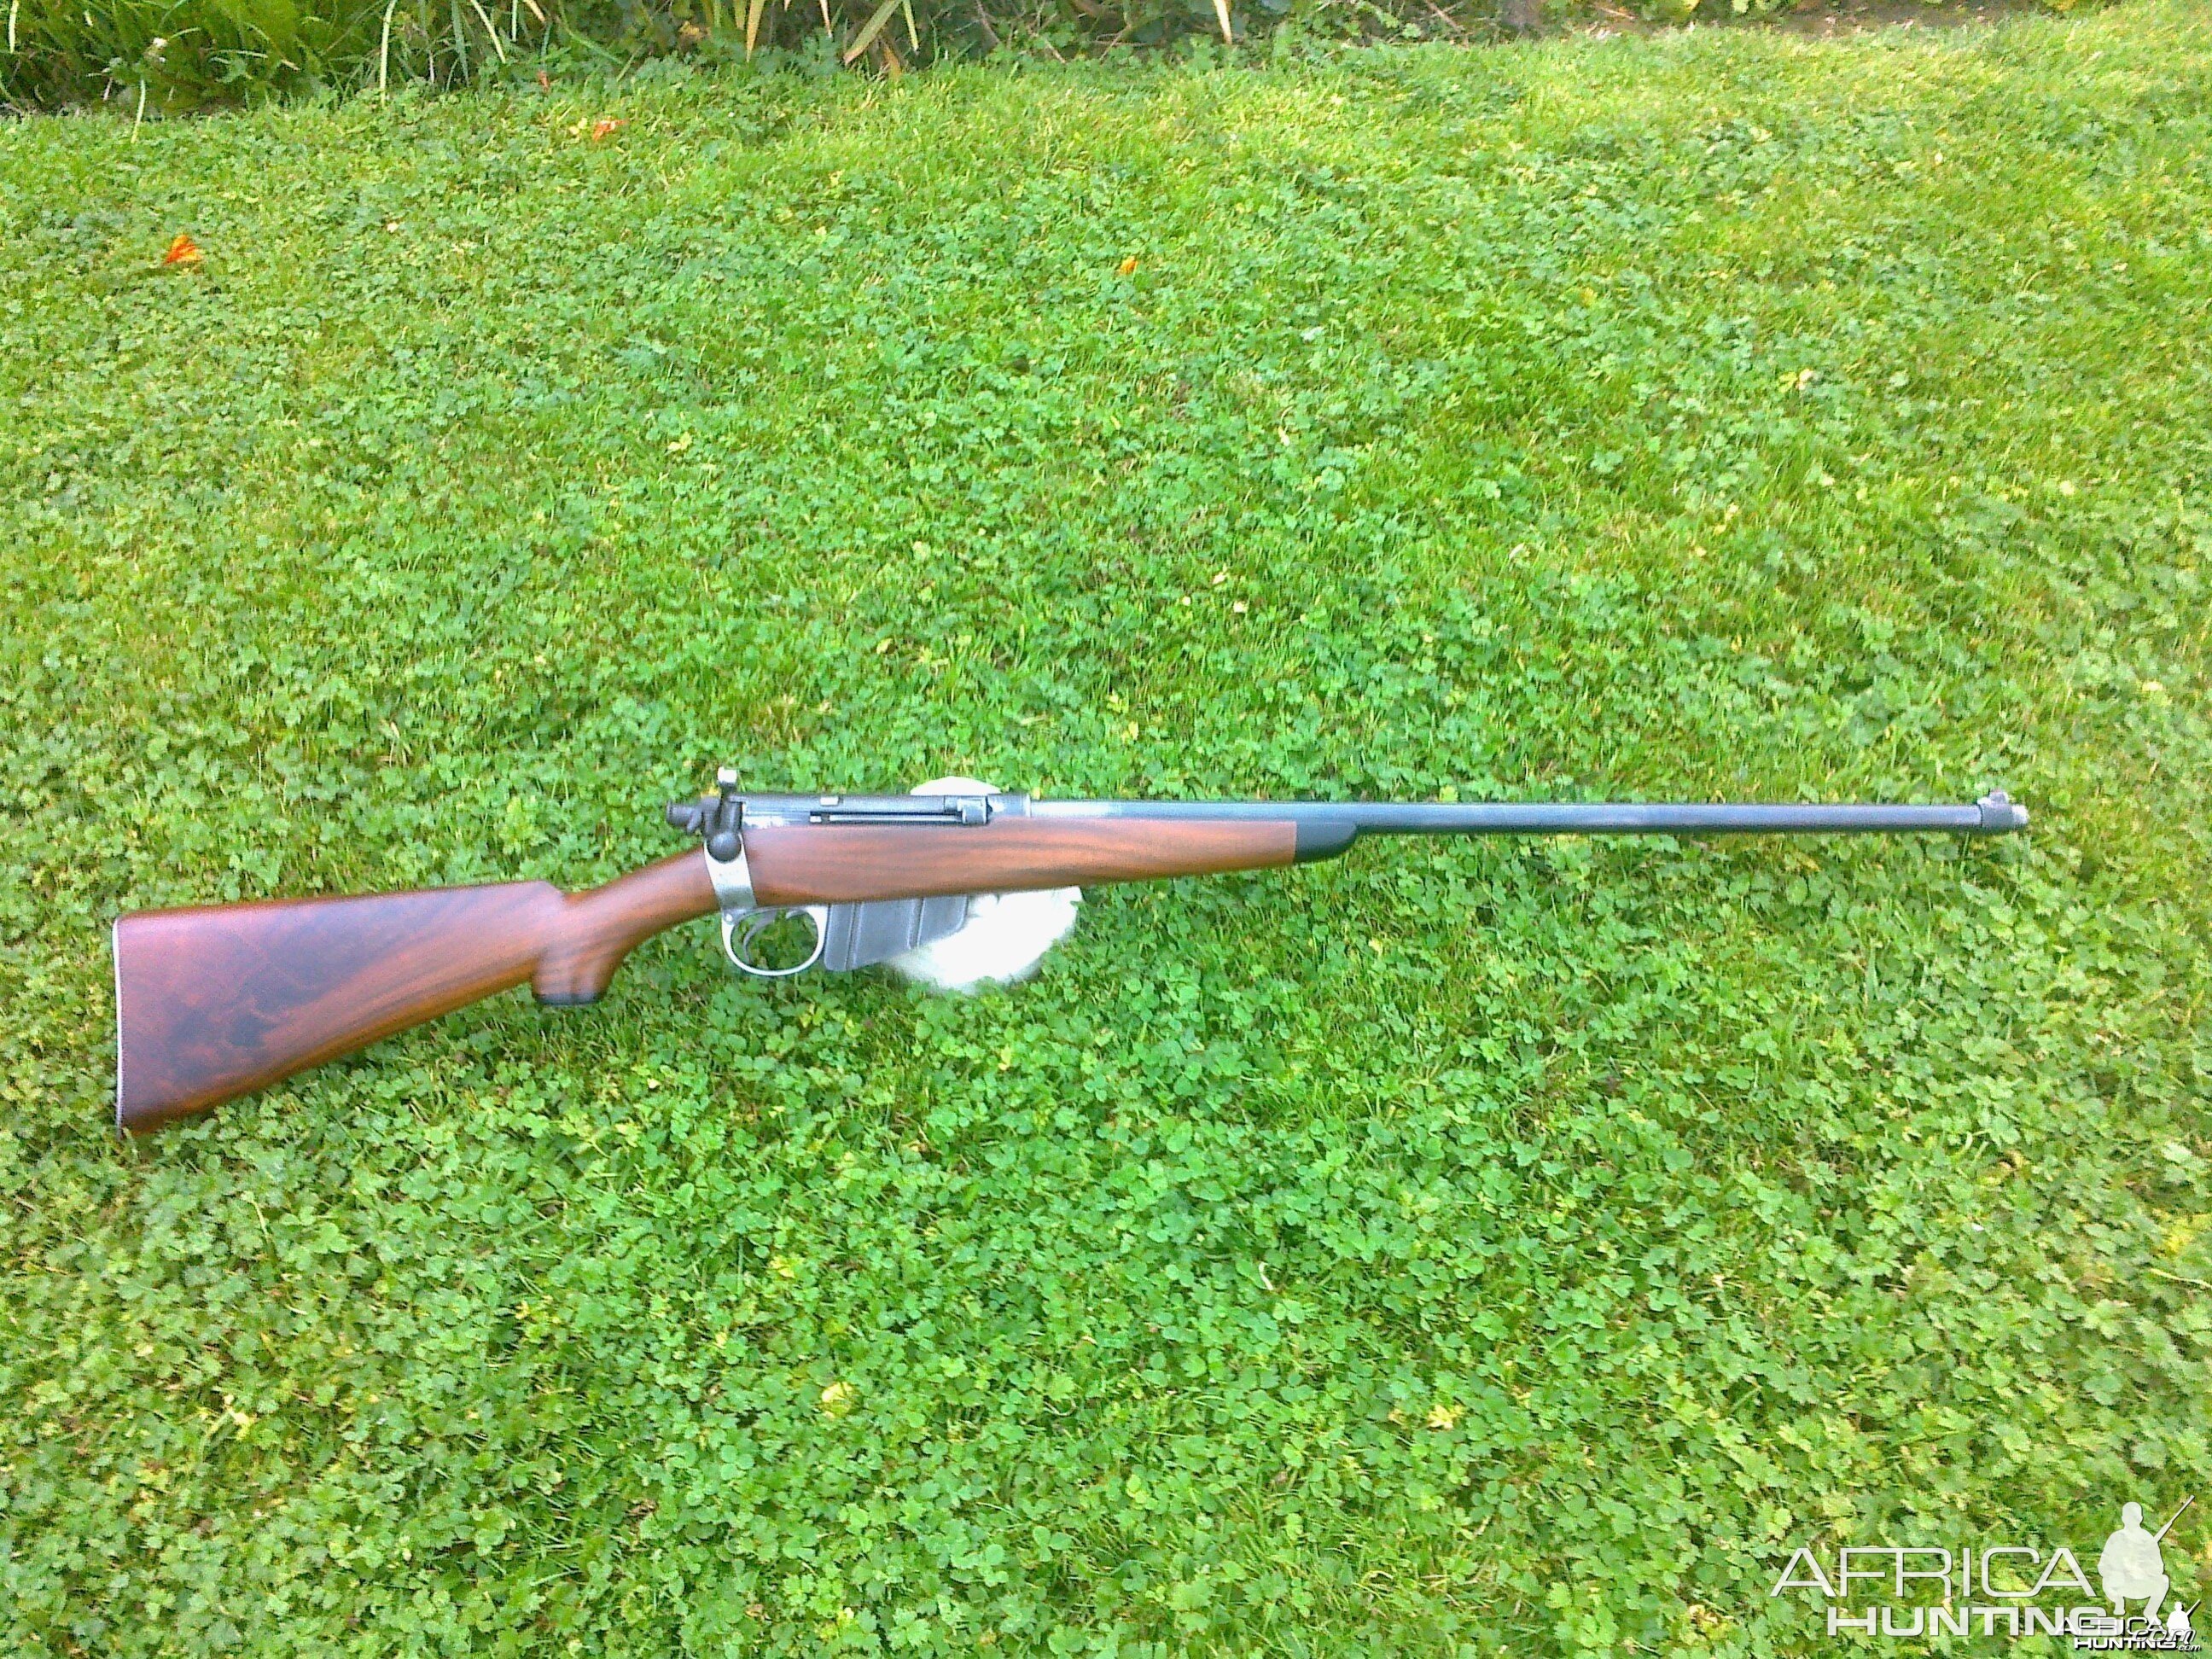 The 400 Lee Enfield sporting rifle I built 